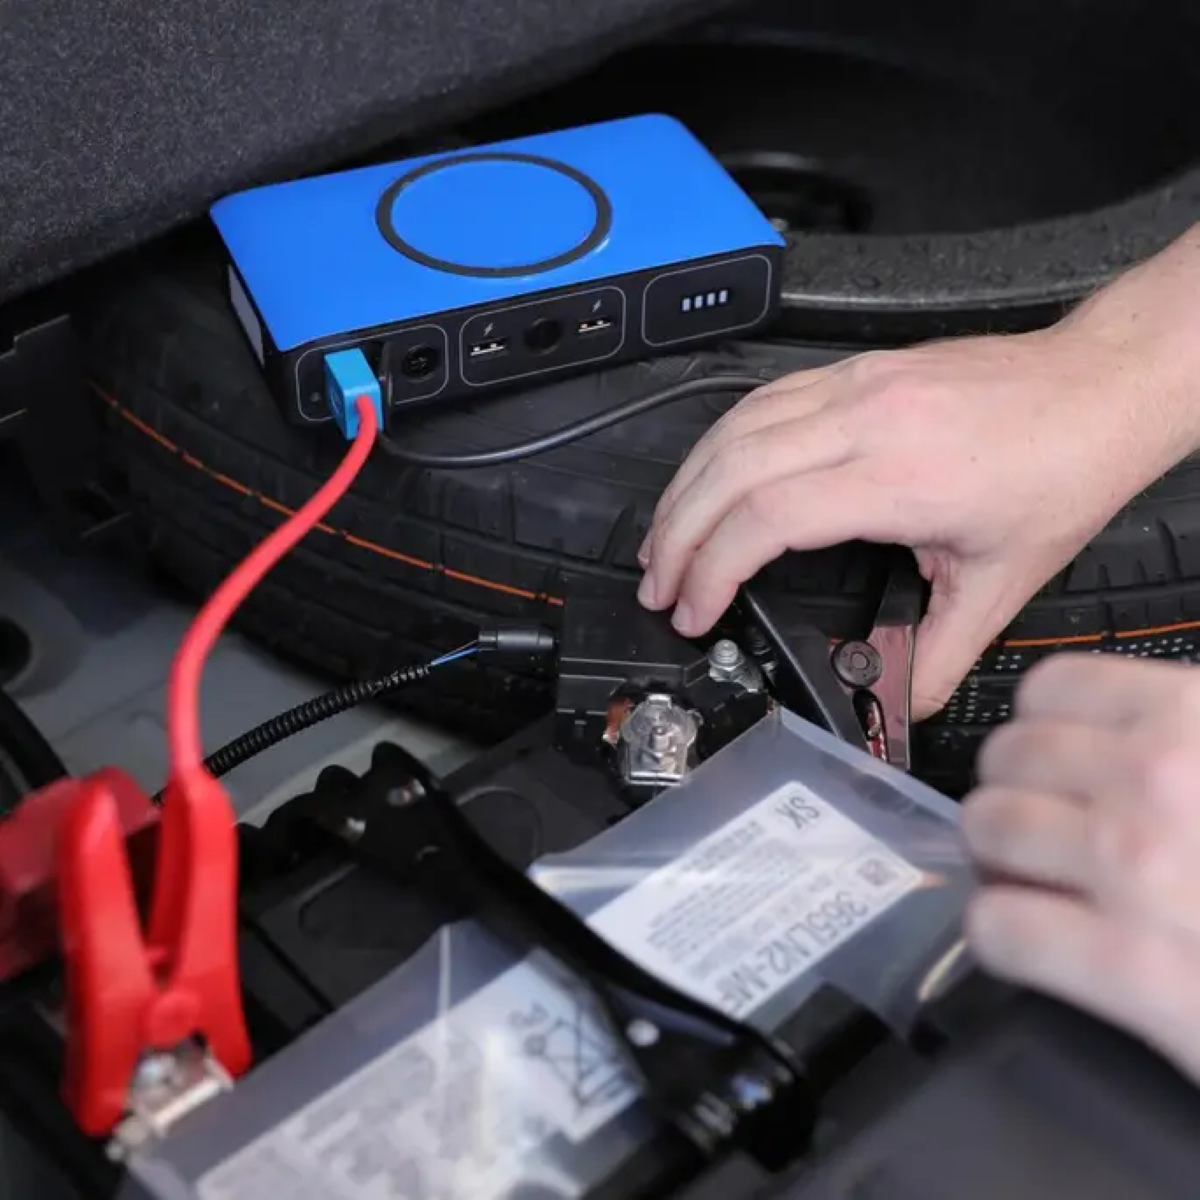 Mophie Go Qi Phone Charger & Car Jump Starter Review - Doubles as a Portable Car Jump Starter